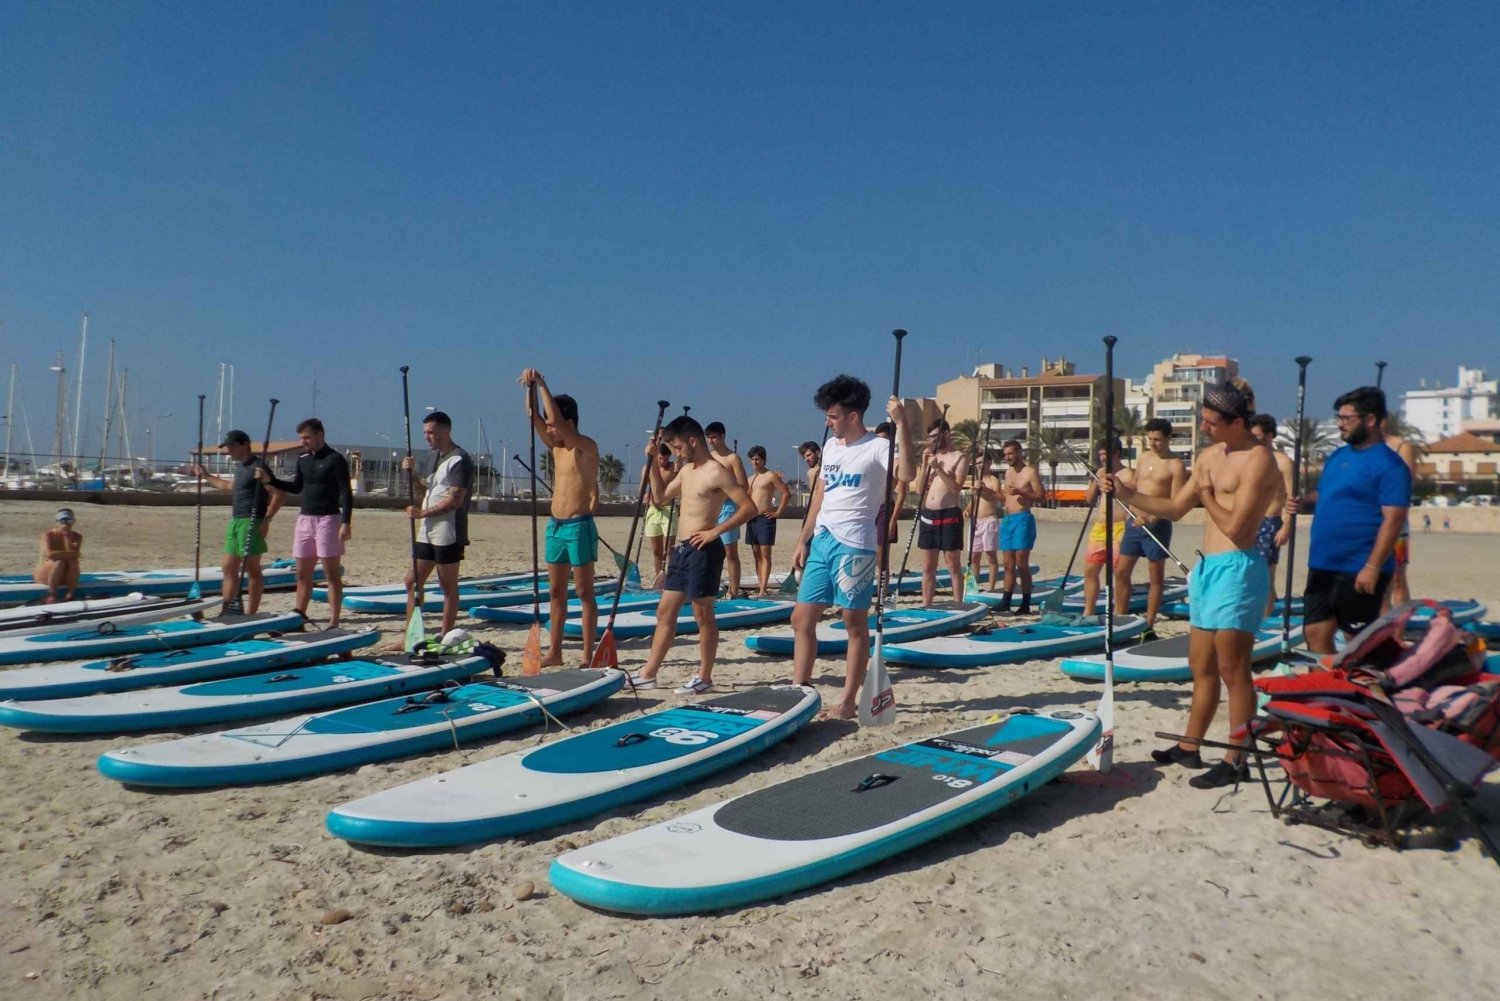 Can Pastilla : Stand-up-paddle rental